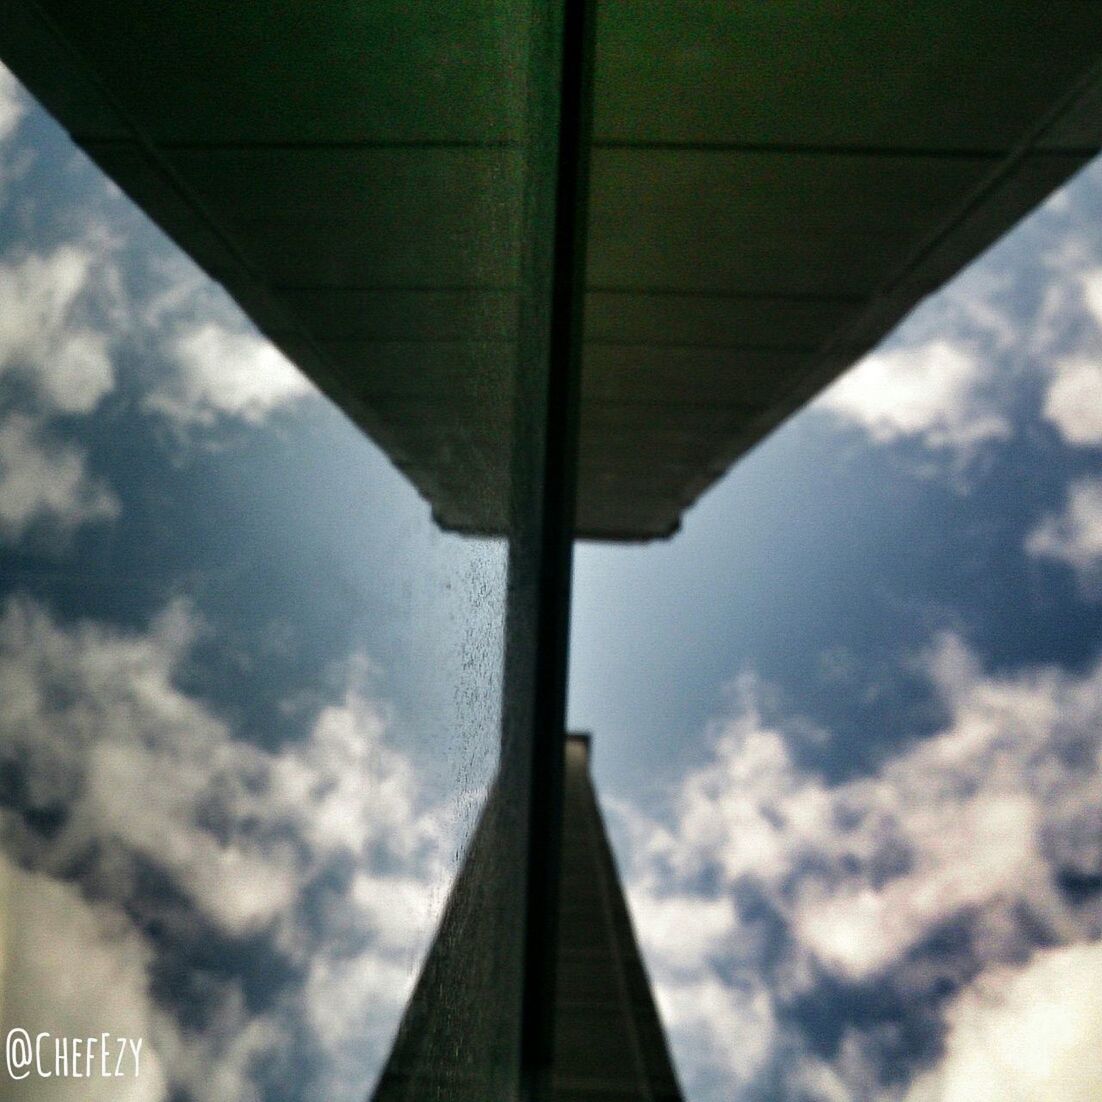 sky, architecture, built structure, cloud - sky, low angle view, cloudy, transportation, connection, cloud, diminishing perspective, engineering, bridge - man made structure, part of, no people, outdoors, the way forward, building exterior, day, vanishing point, travel